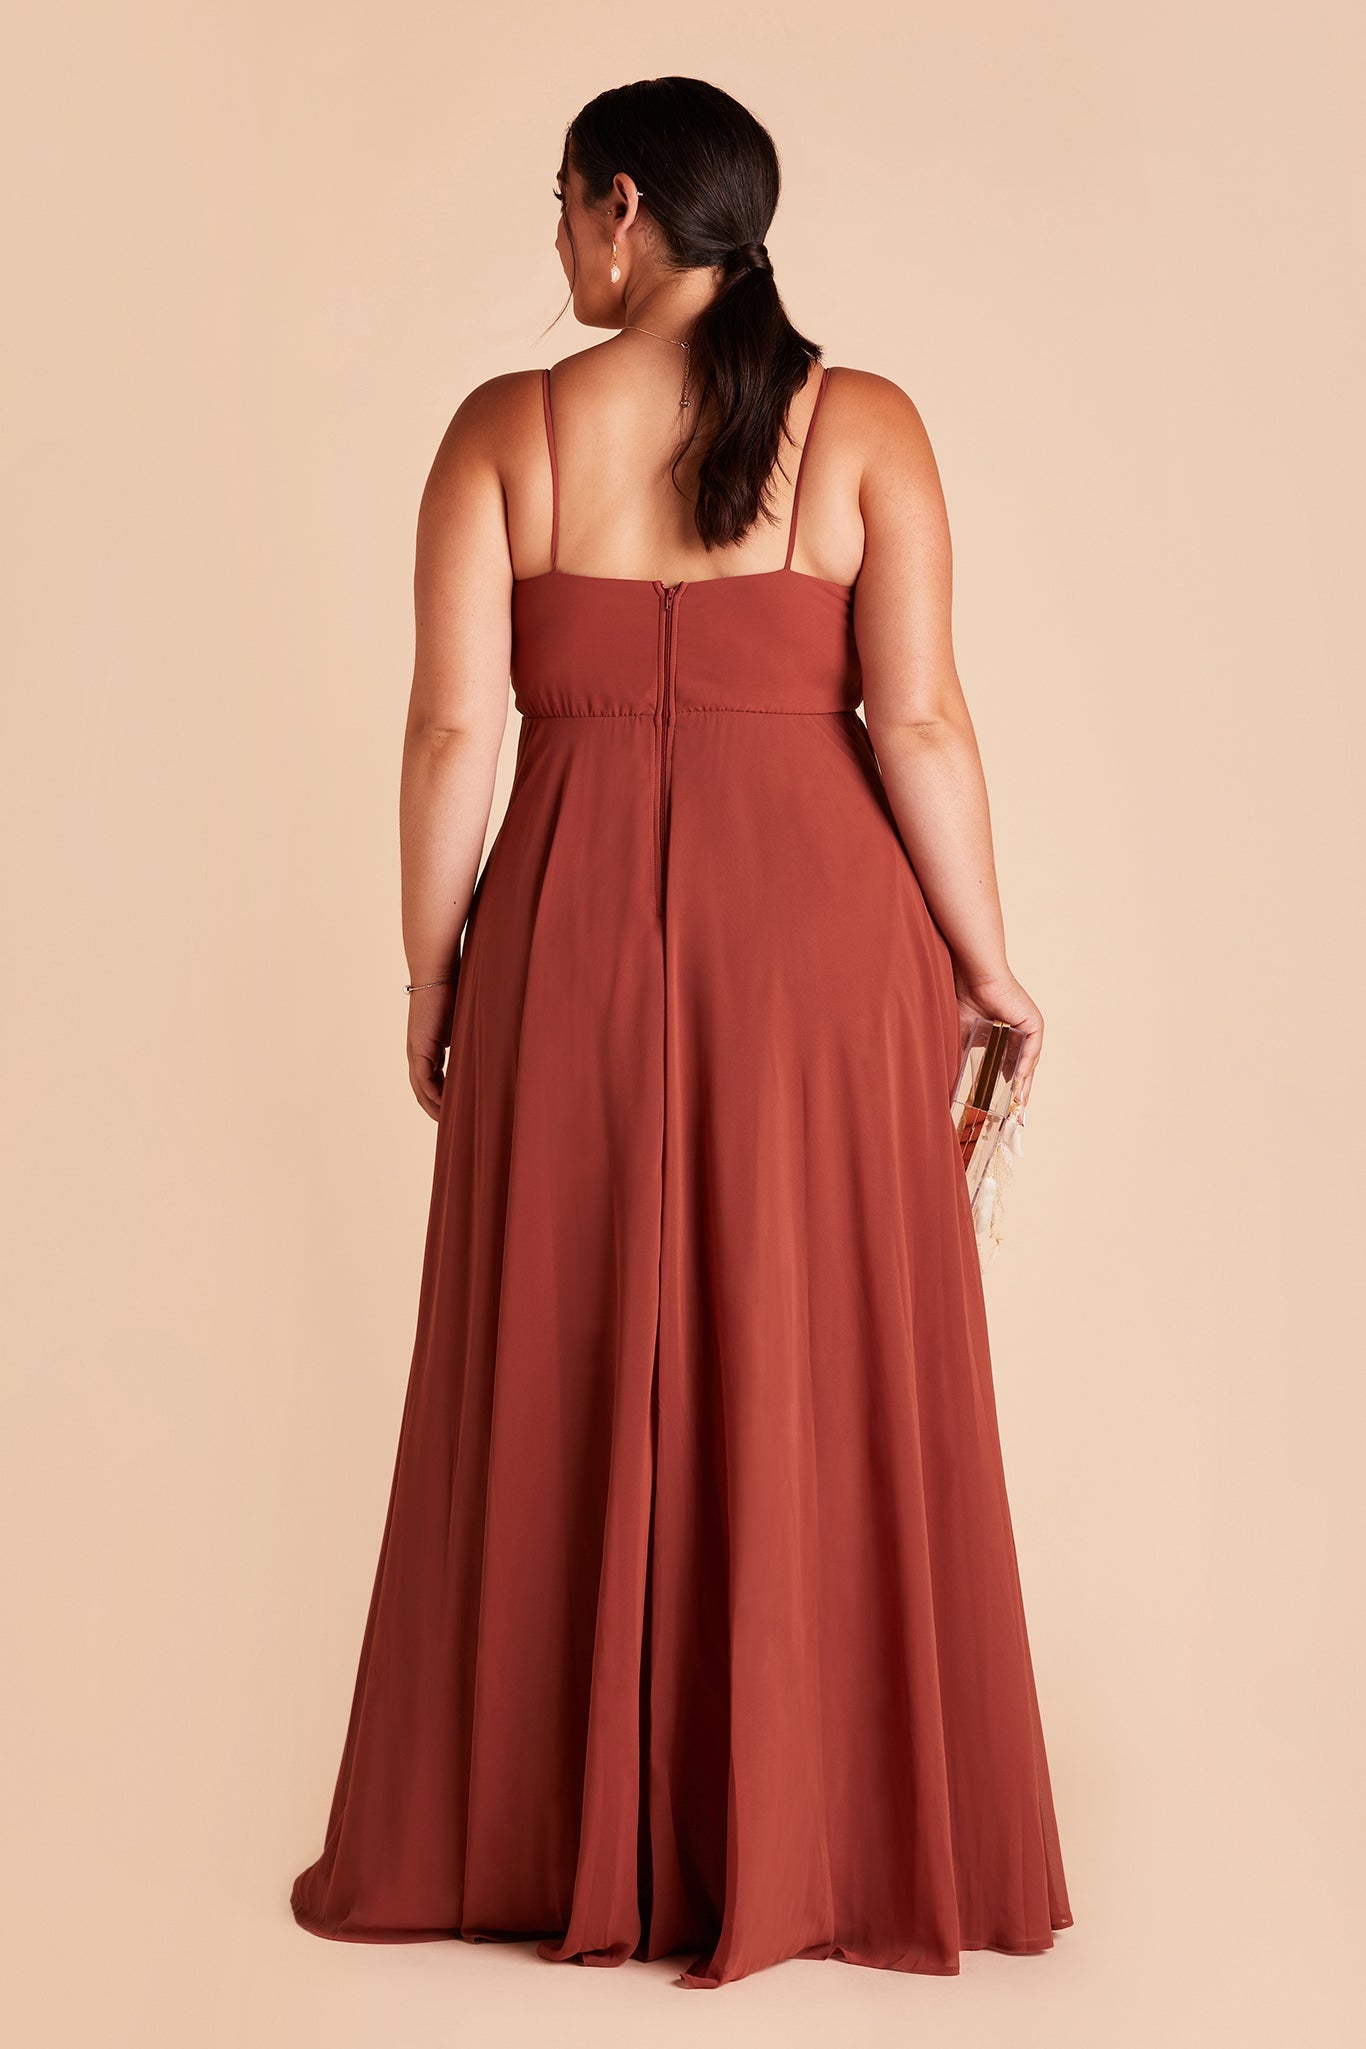 Kaia plus-size bridesmaid dress with pocket in spice chiffon by Birdy Grey, back view